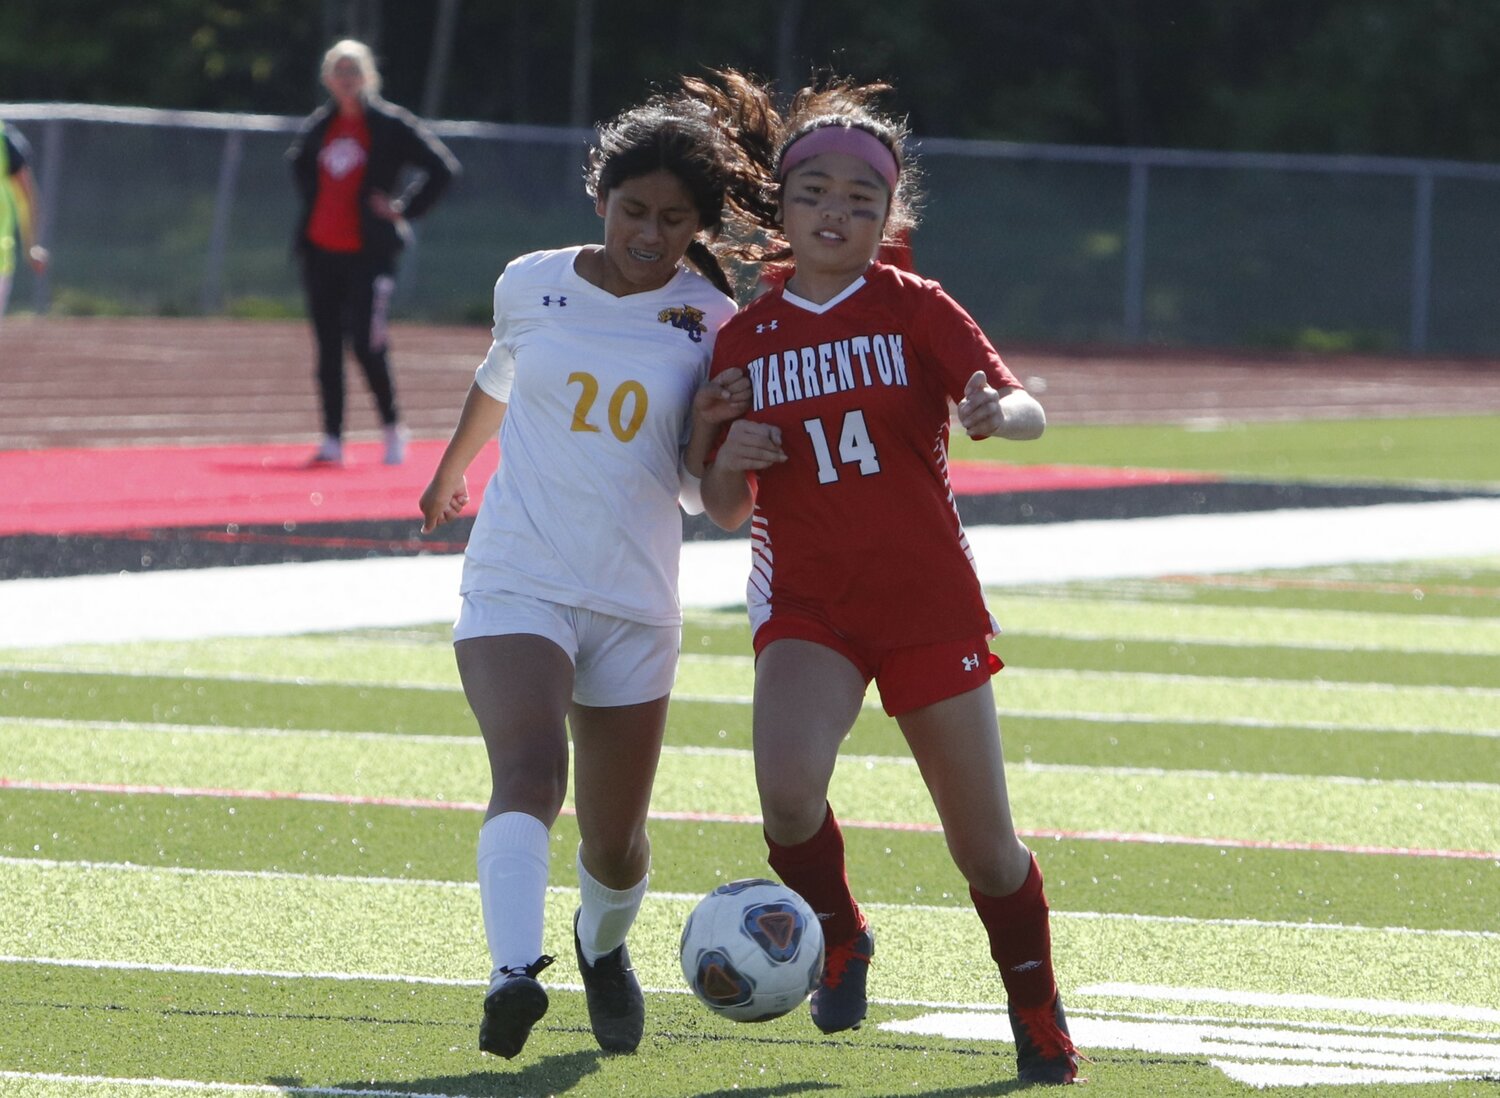 Wright City junior Andrea Lopez Luna (left) battles with Warrenton's Lana Le for possession of the ball during Monday's game.